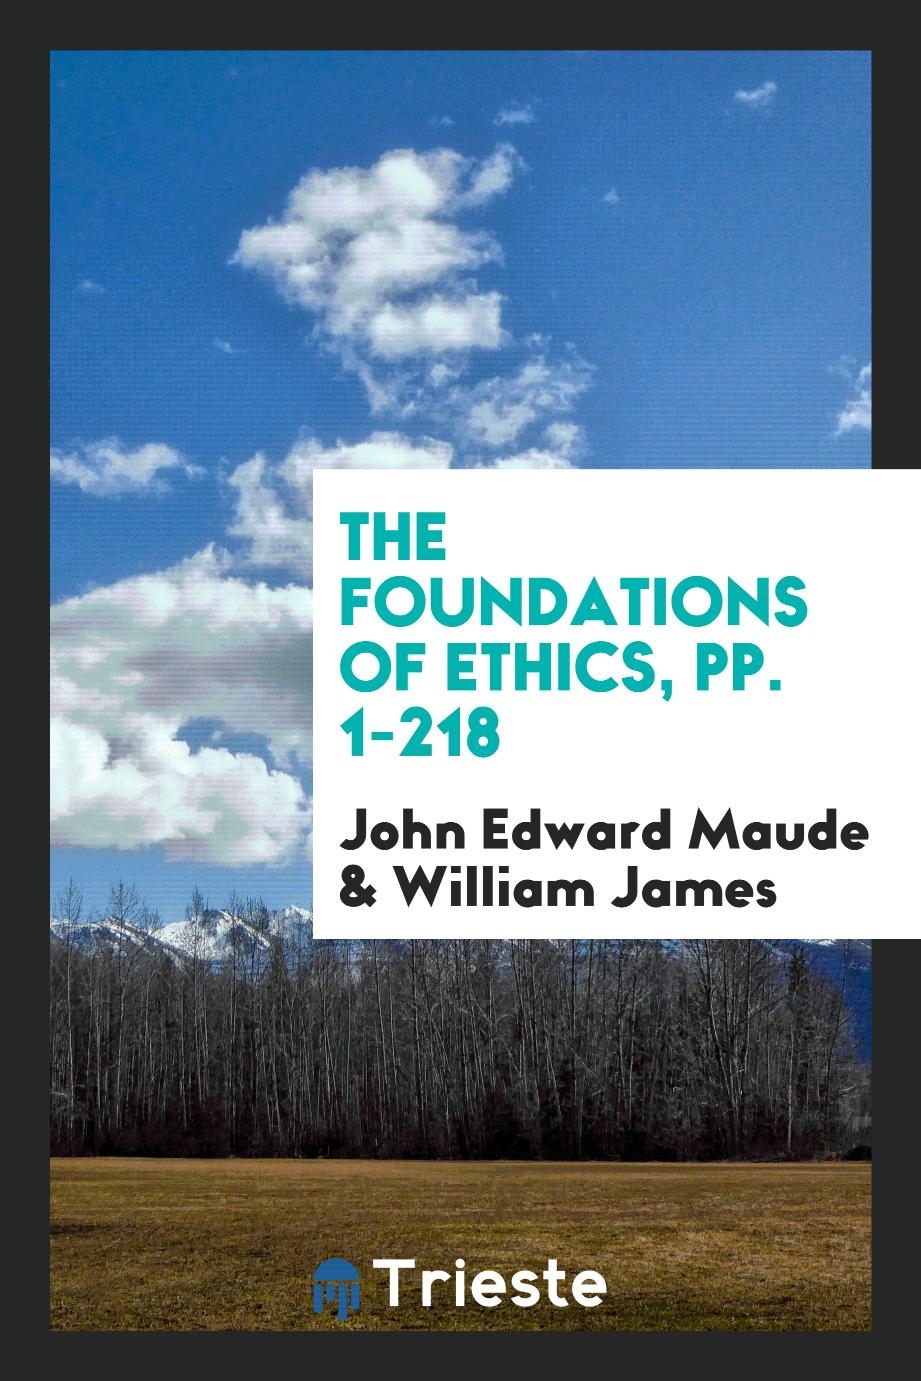 The Foundations of Ethics, pp. 1-218